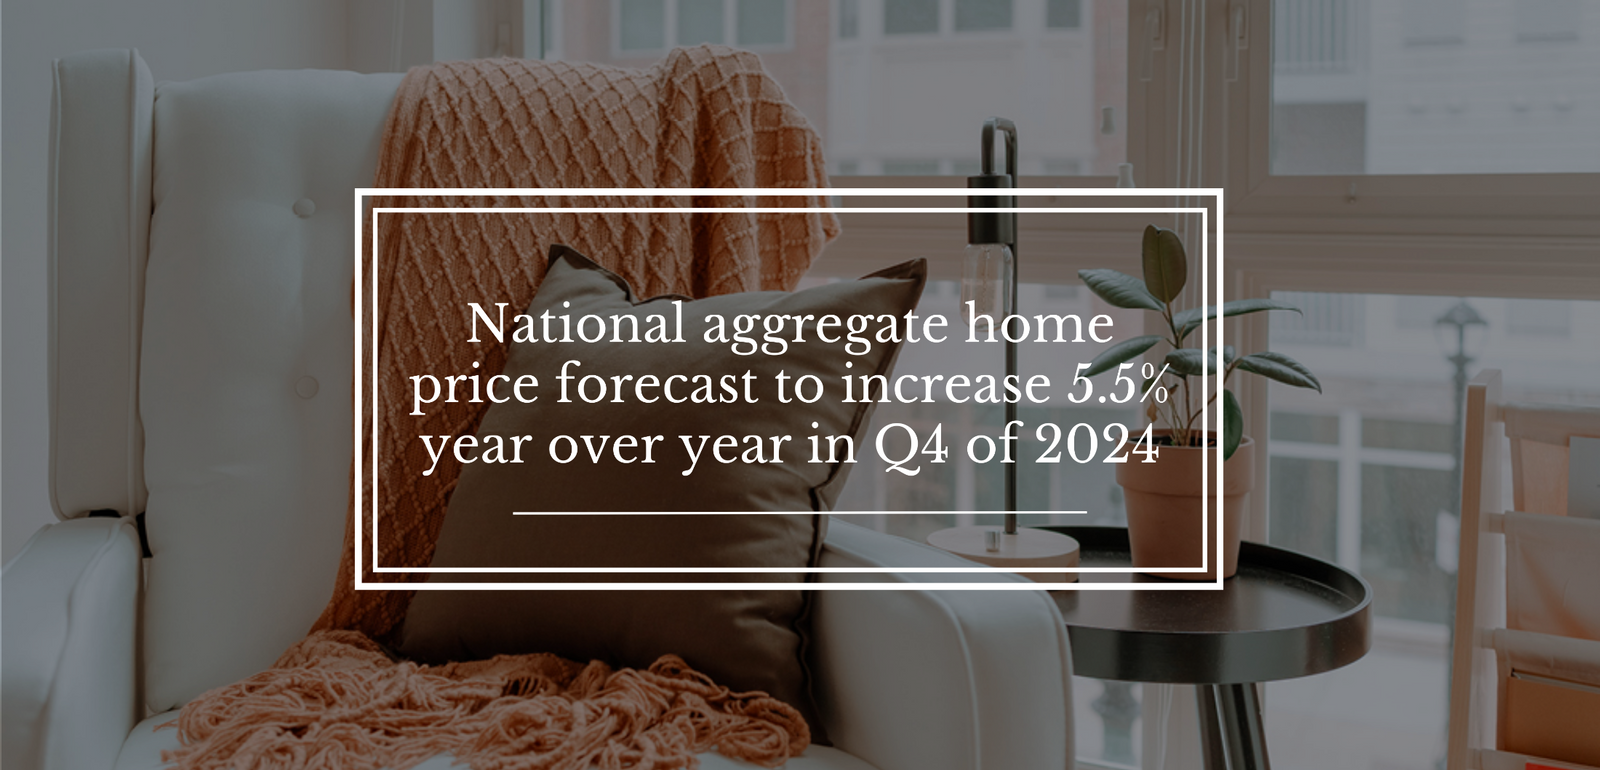 Modest interest rate cuts expected to spur activity next year, leading to a rise in property prices